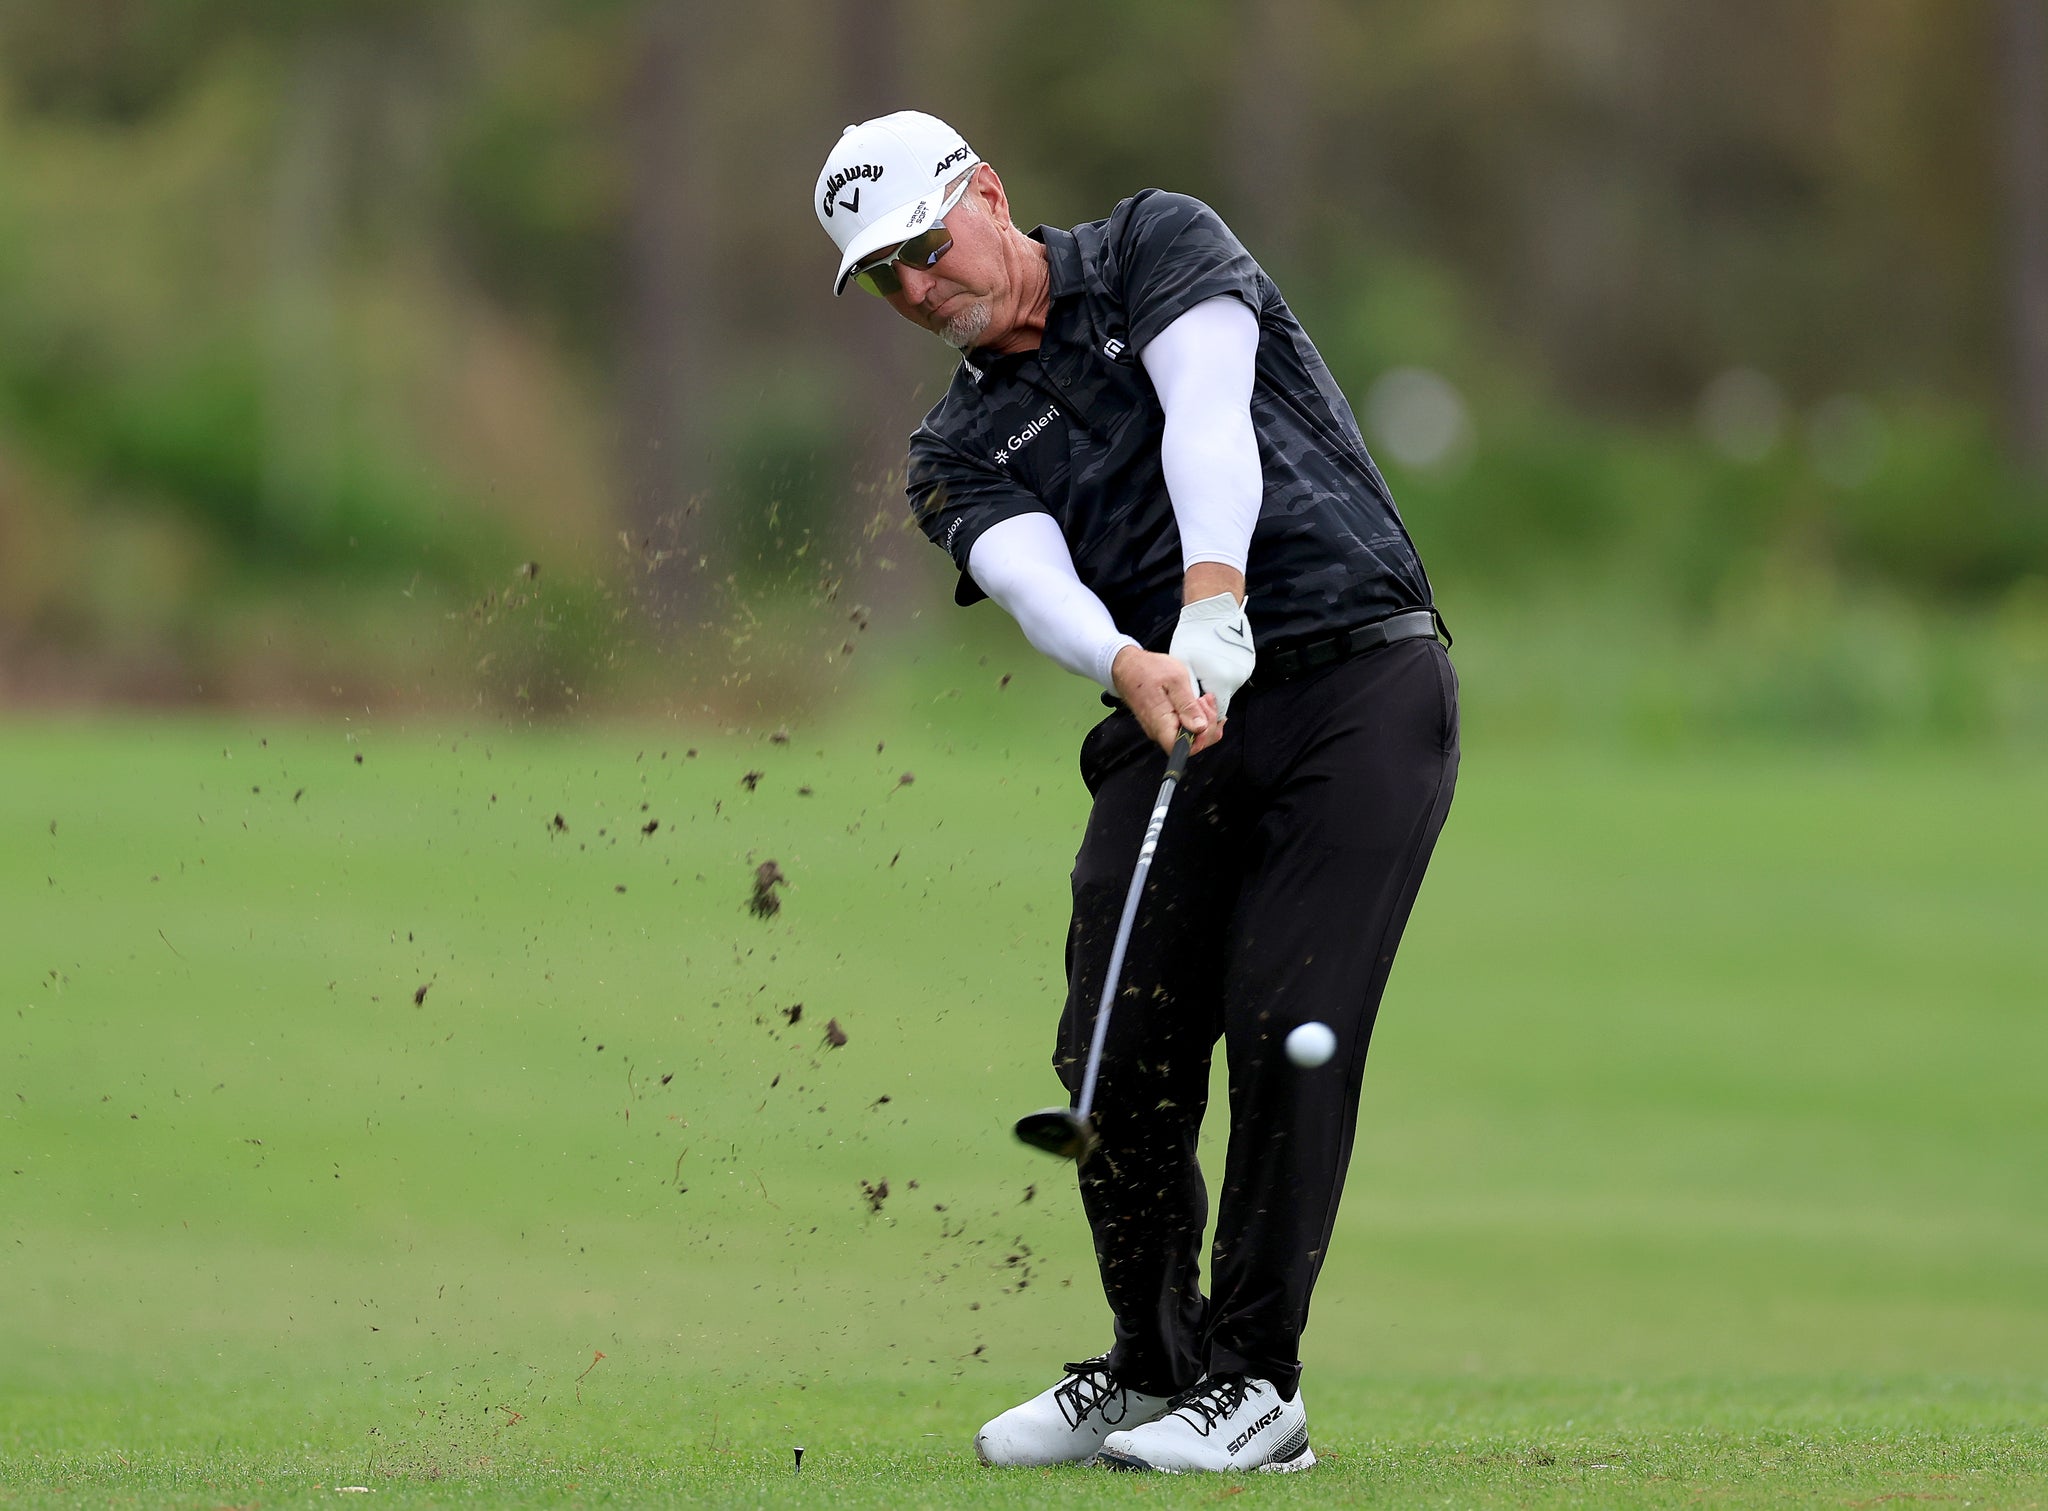 Tour Champion David Duval selects SQAIRZ as his new exclusive footwear partner